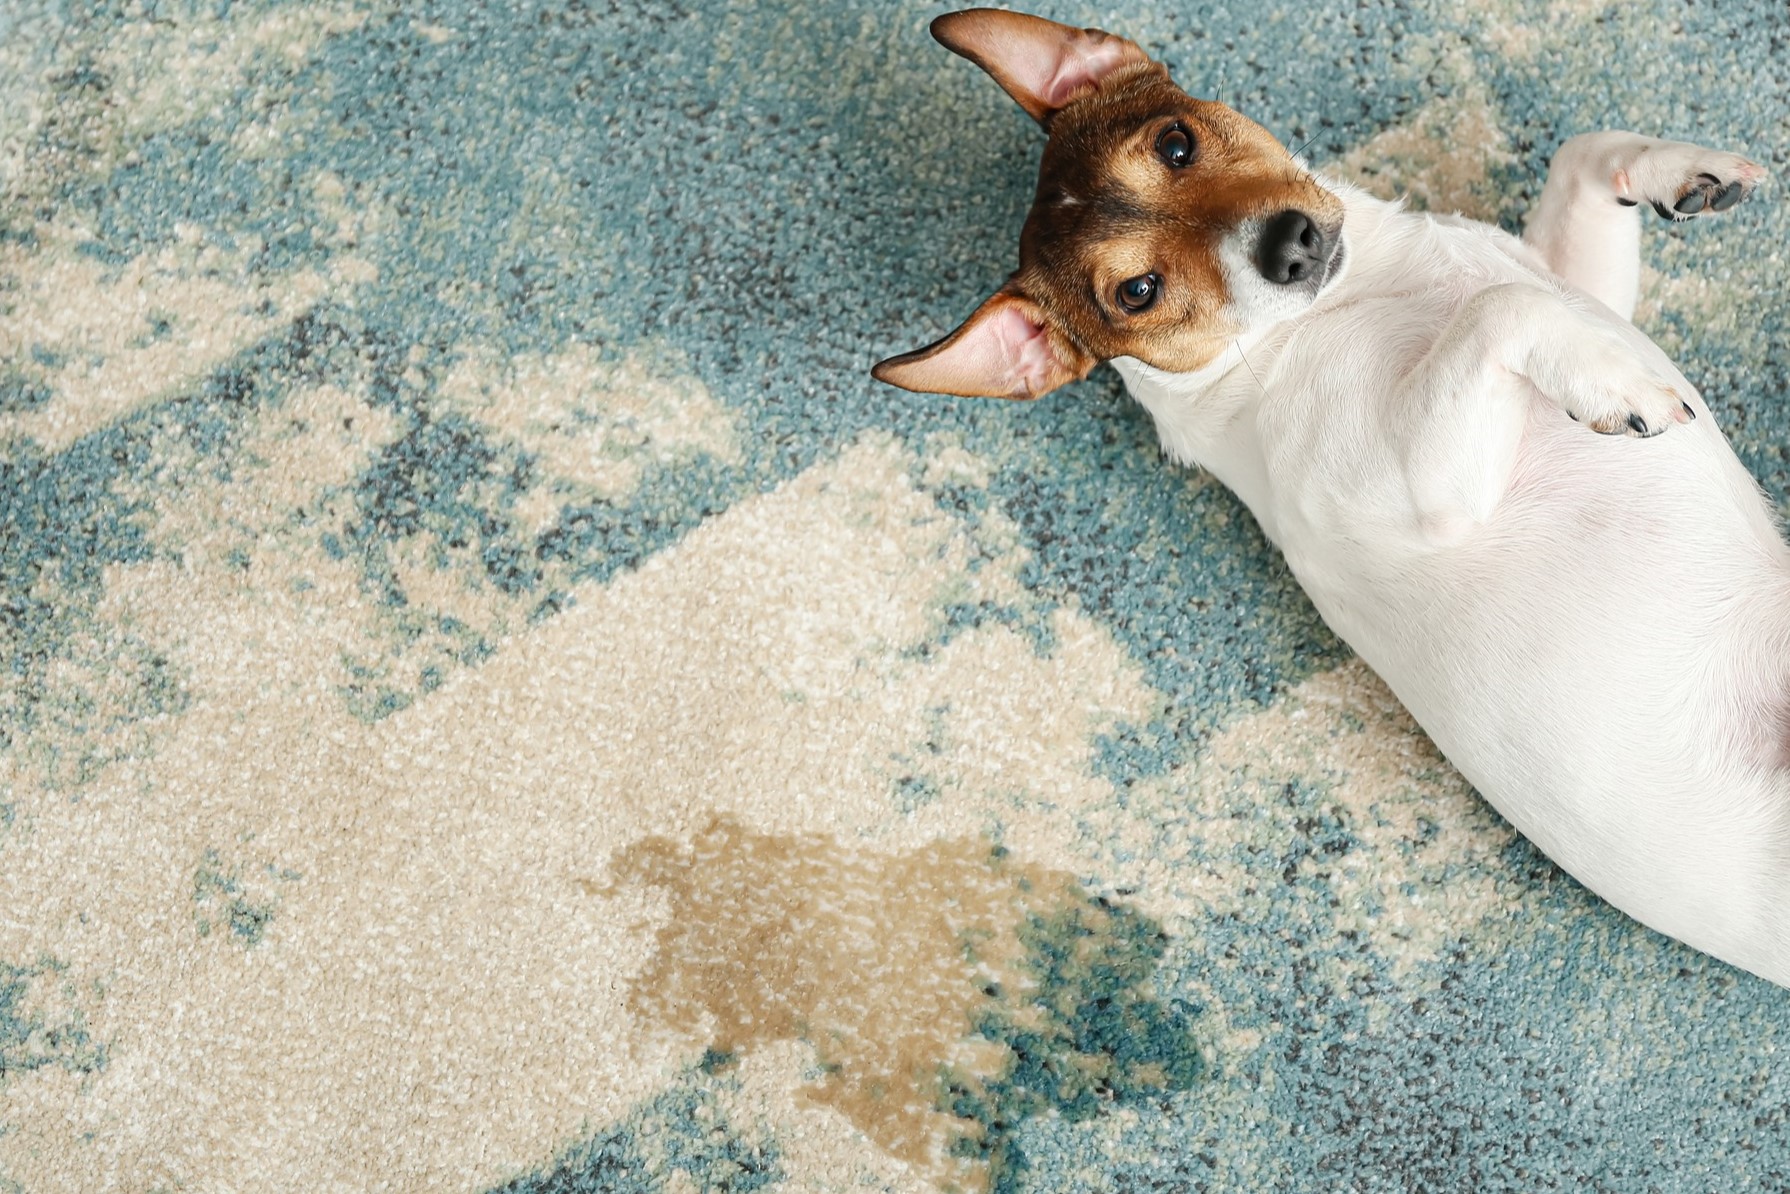 Pet accidents on the area rug - rug cleaning services - cute dog - Springfield, IL